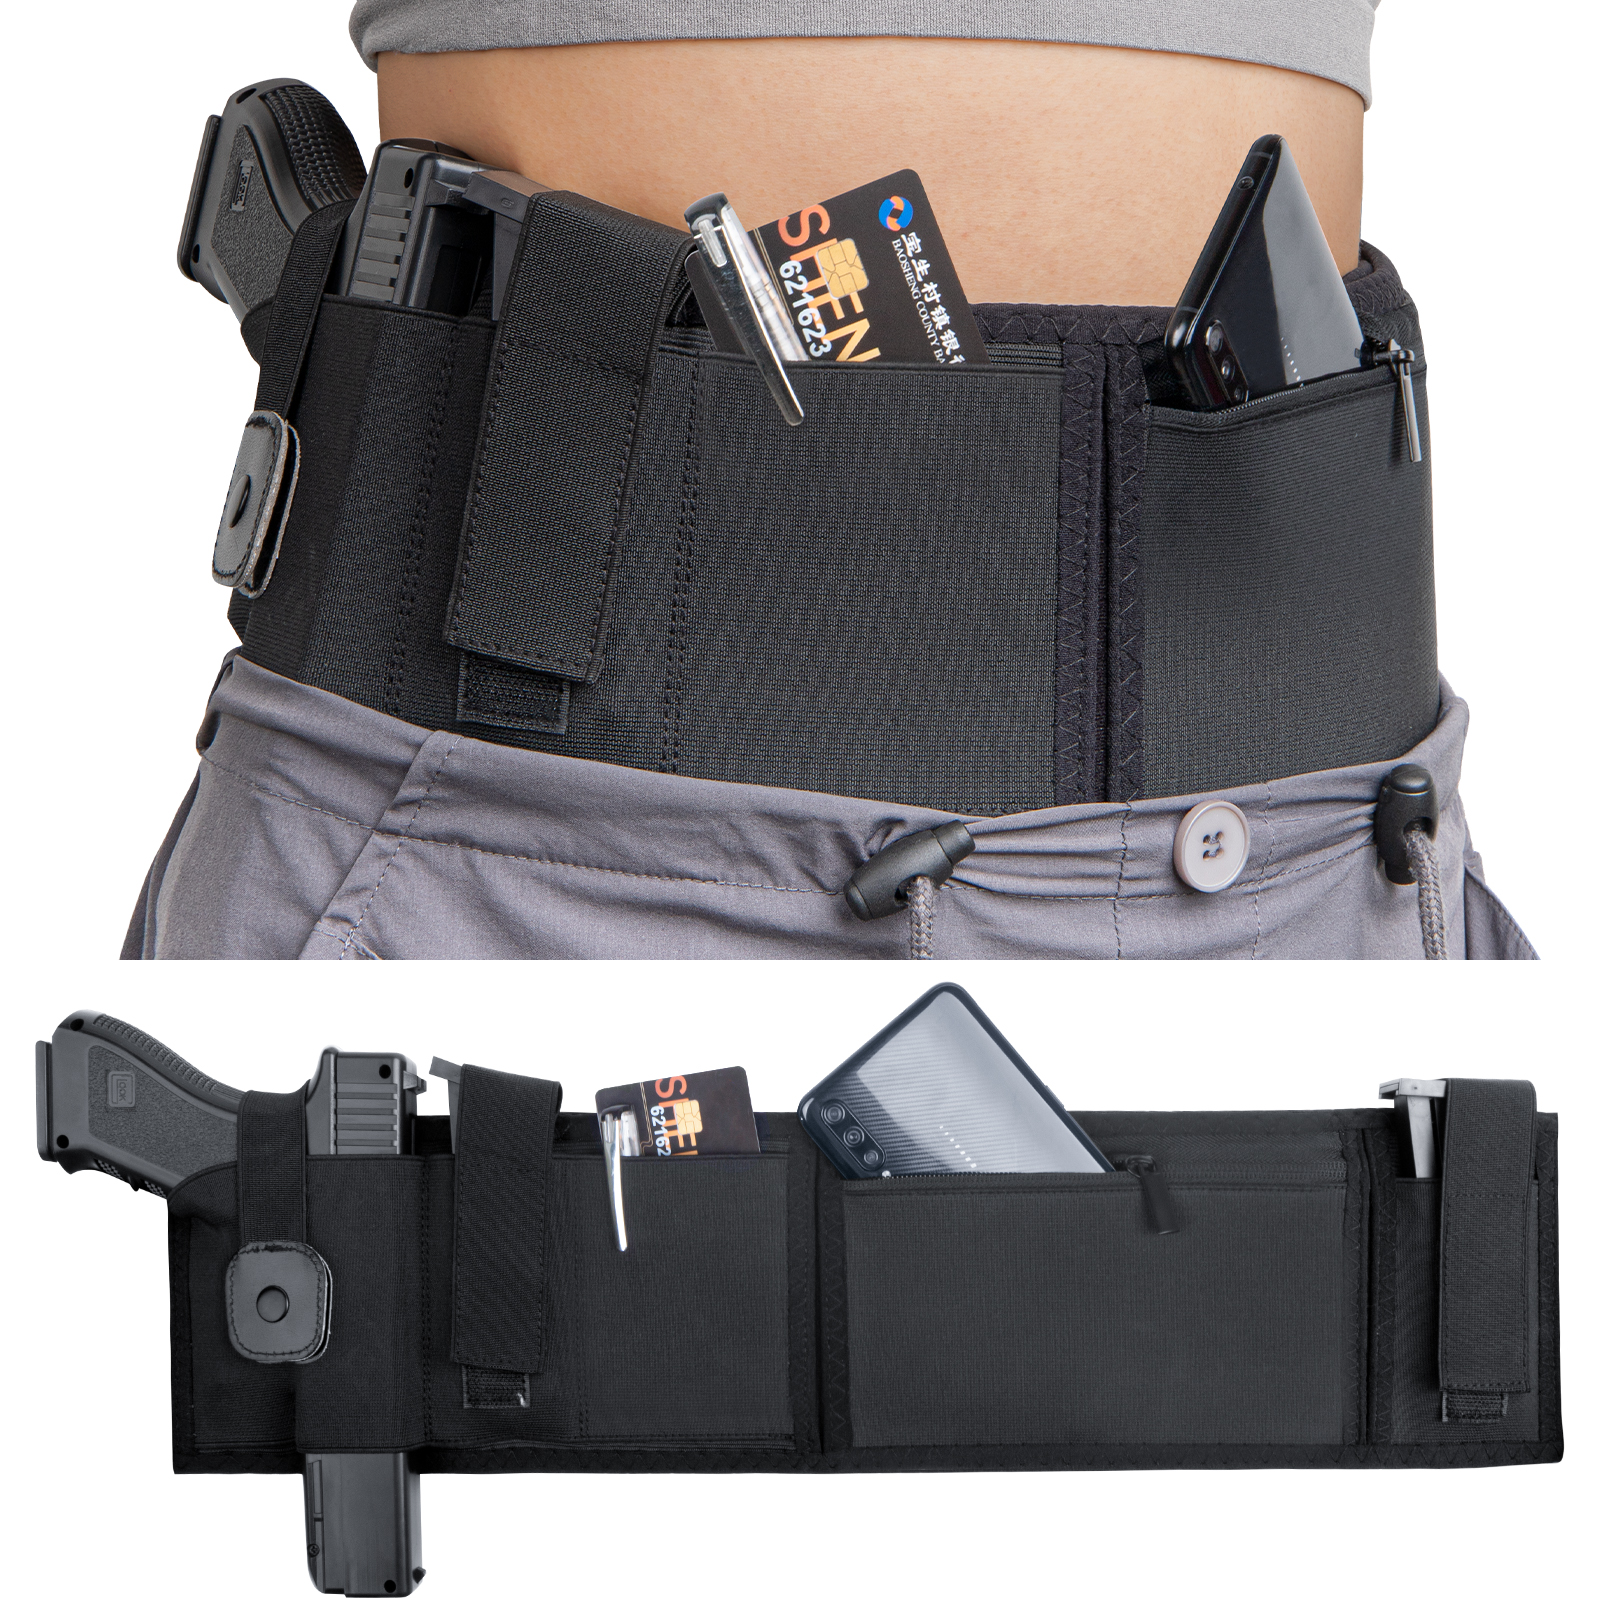 KUMGIM Belly Band Holster for Concealed Carry, Belly Gun Holsters for Men Women 380 9MM, Waist Band 